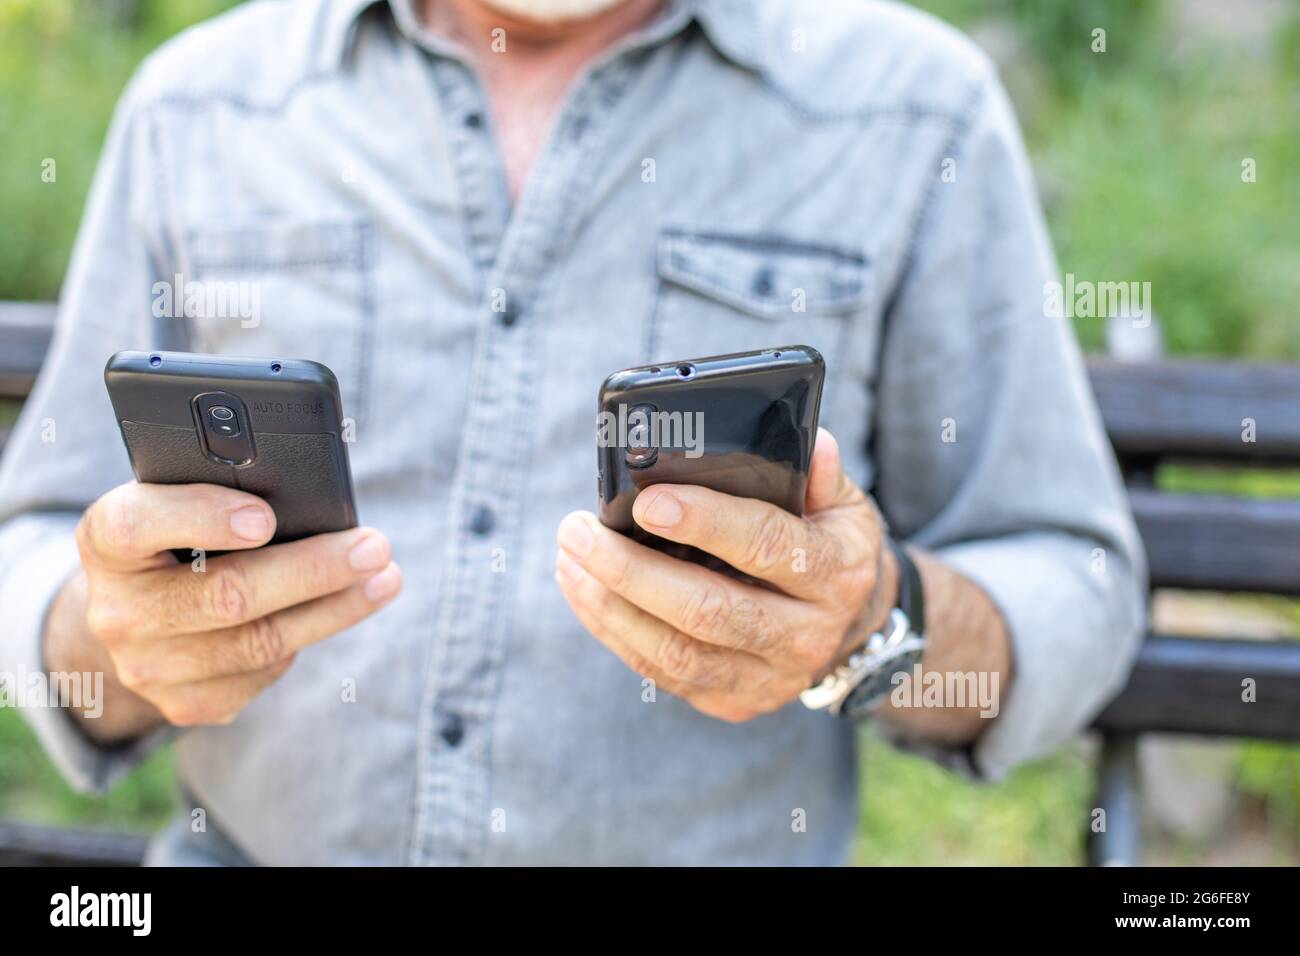 Old man compare two smartphones. Stock Photo